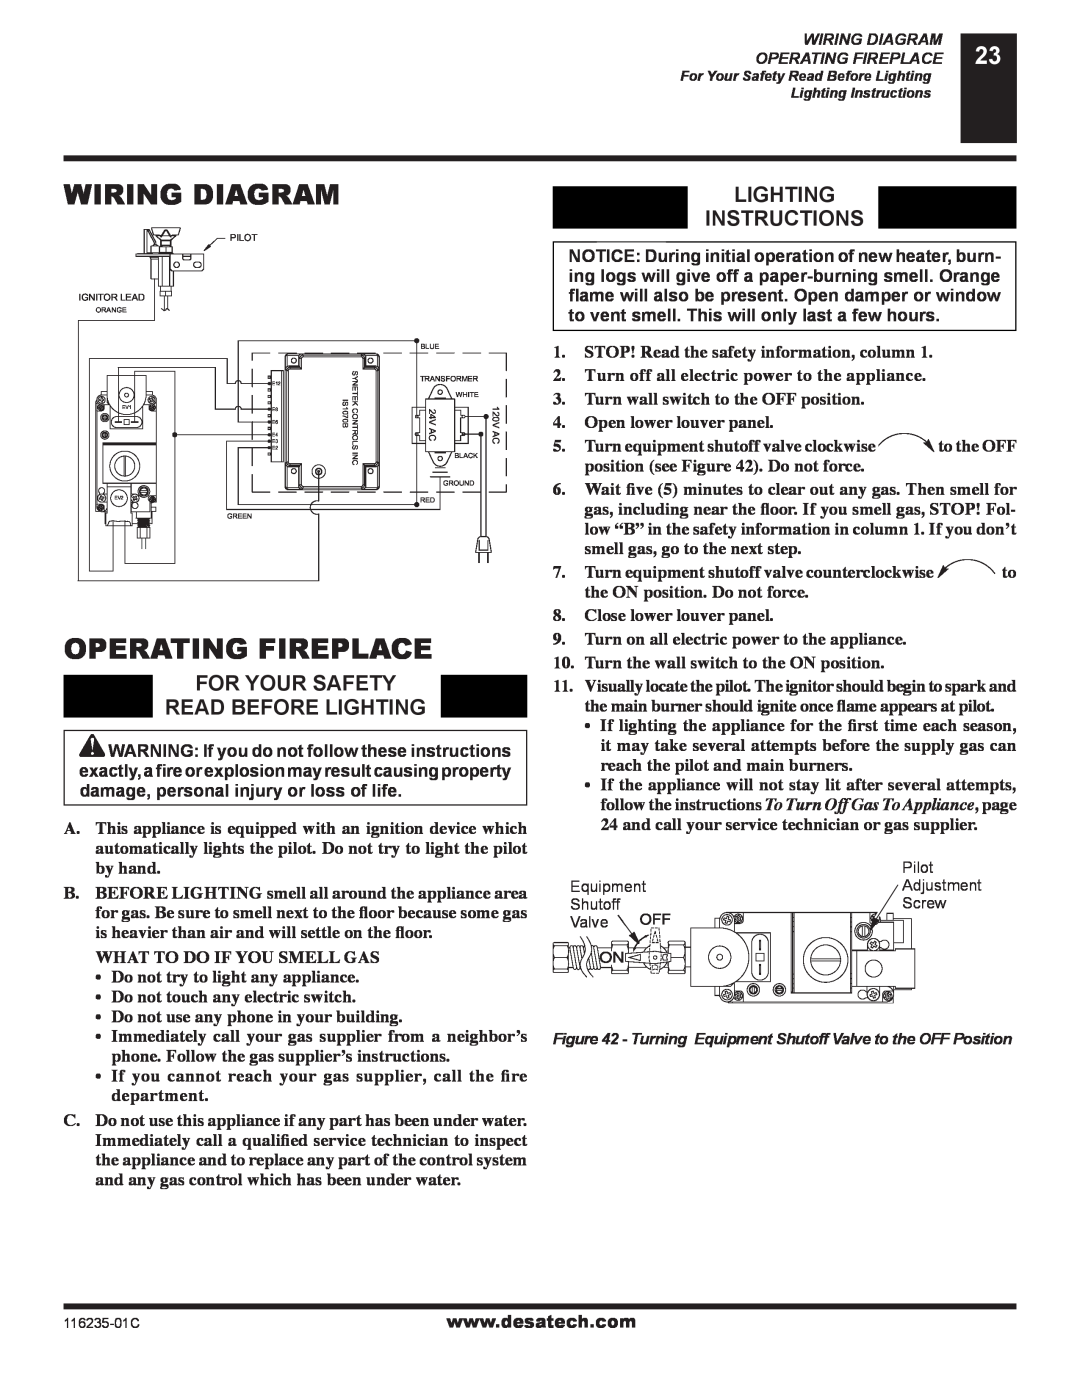 Desa (V)VC36PE, (V)VC36NE Wiring Diagram, Operating Fireplace, Lighting Instructions, For Your Safety Read Before Lighting 